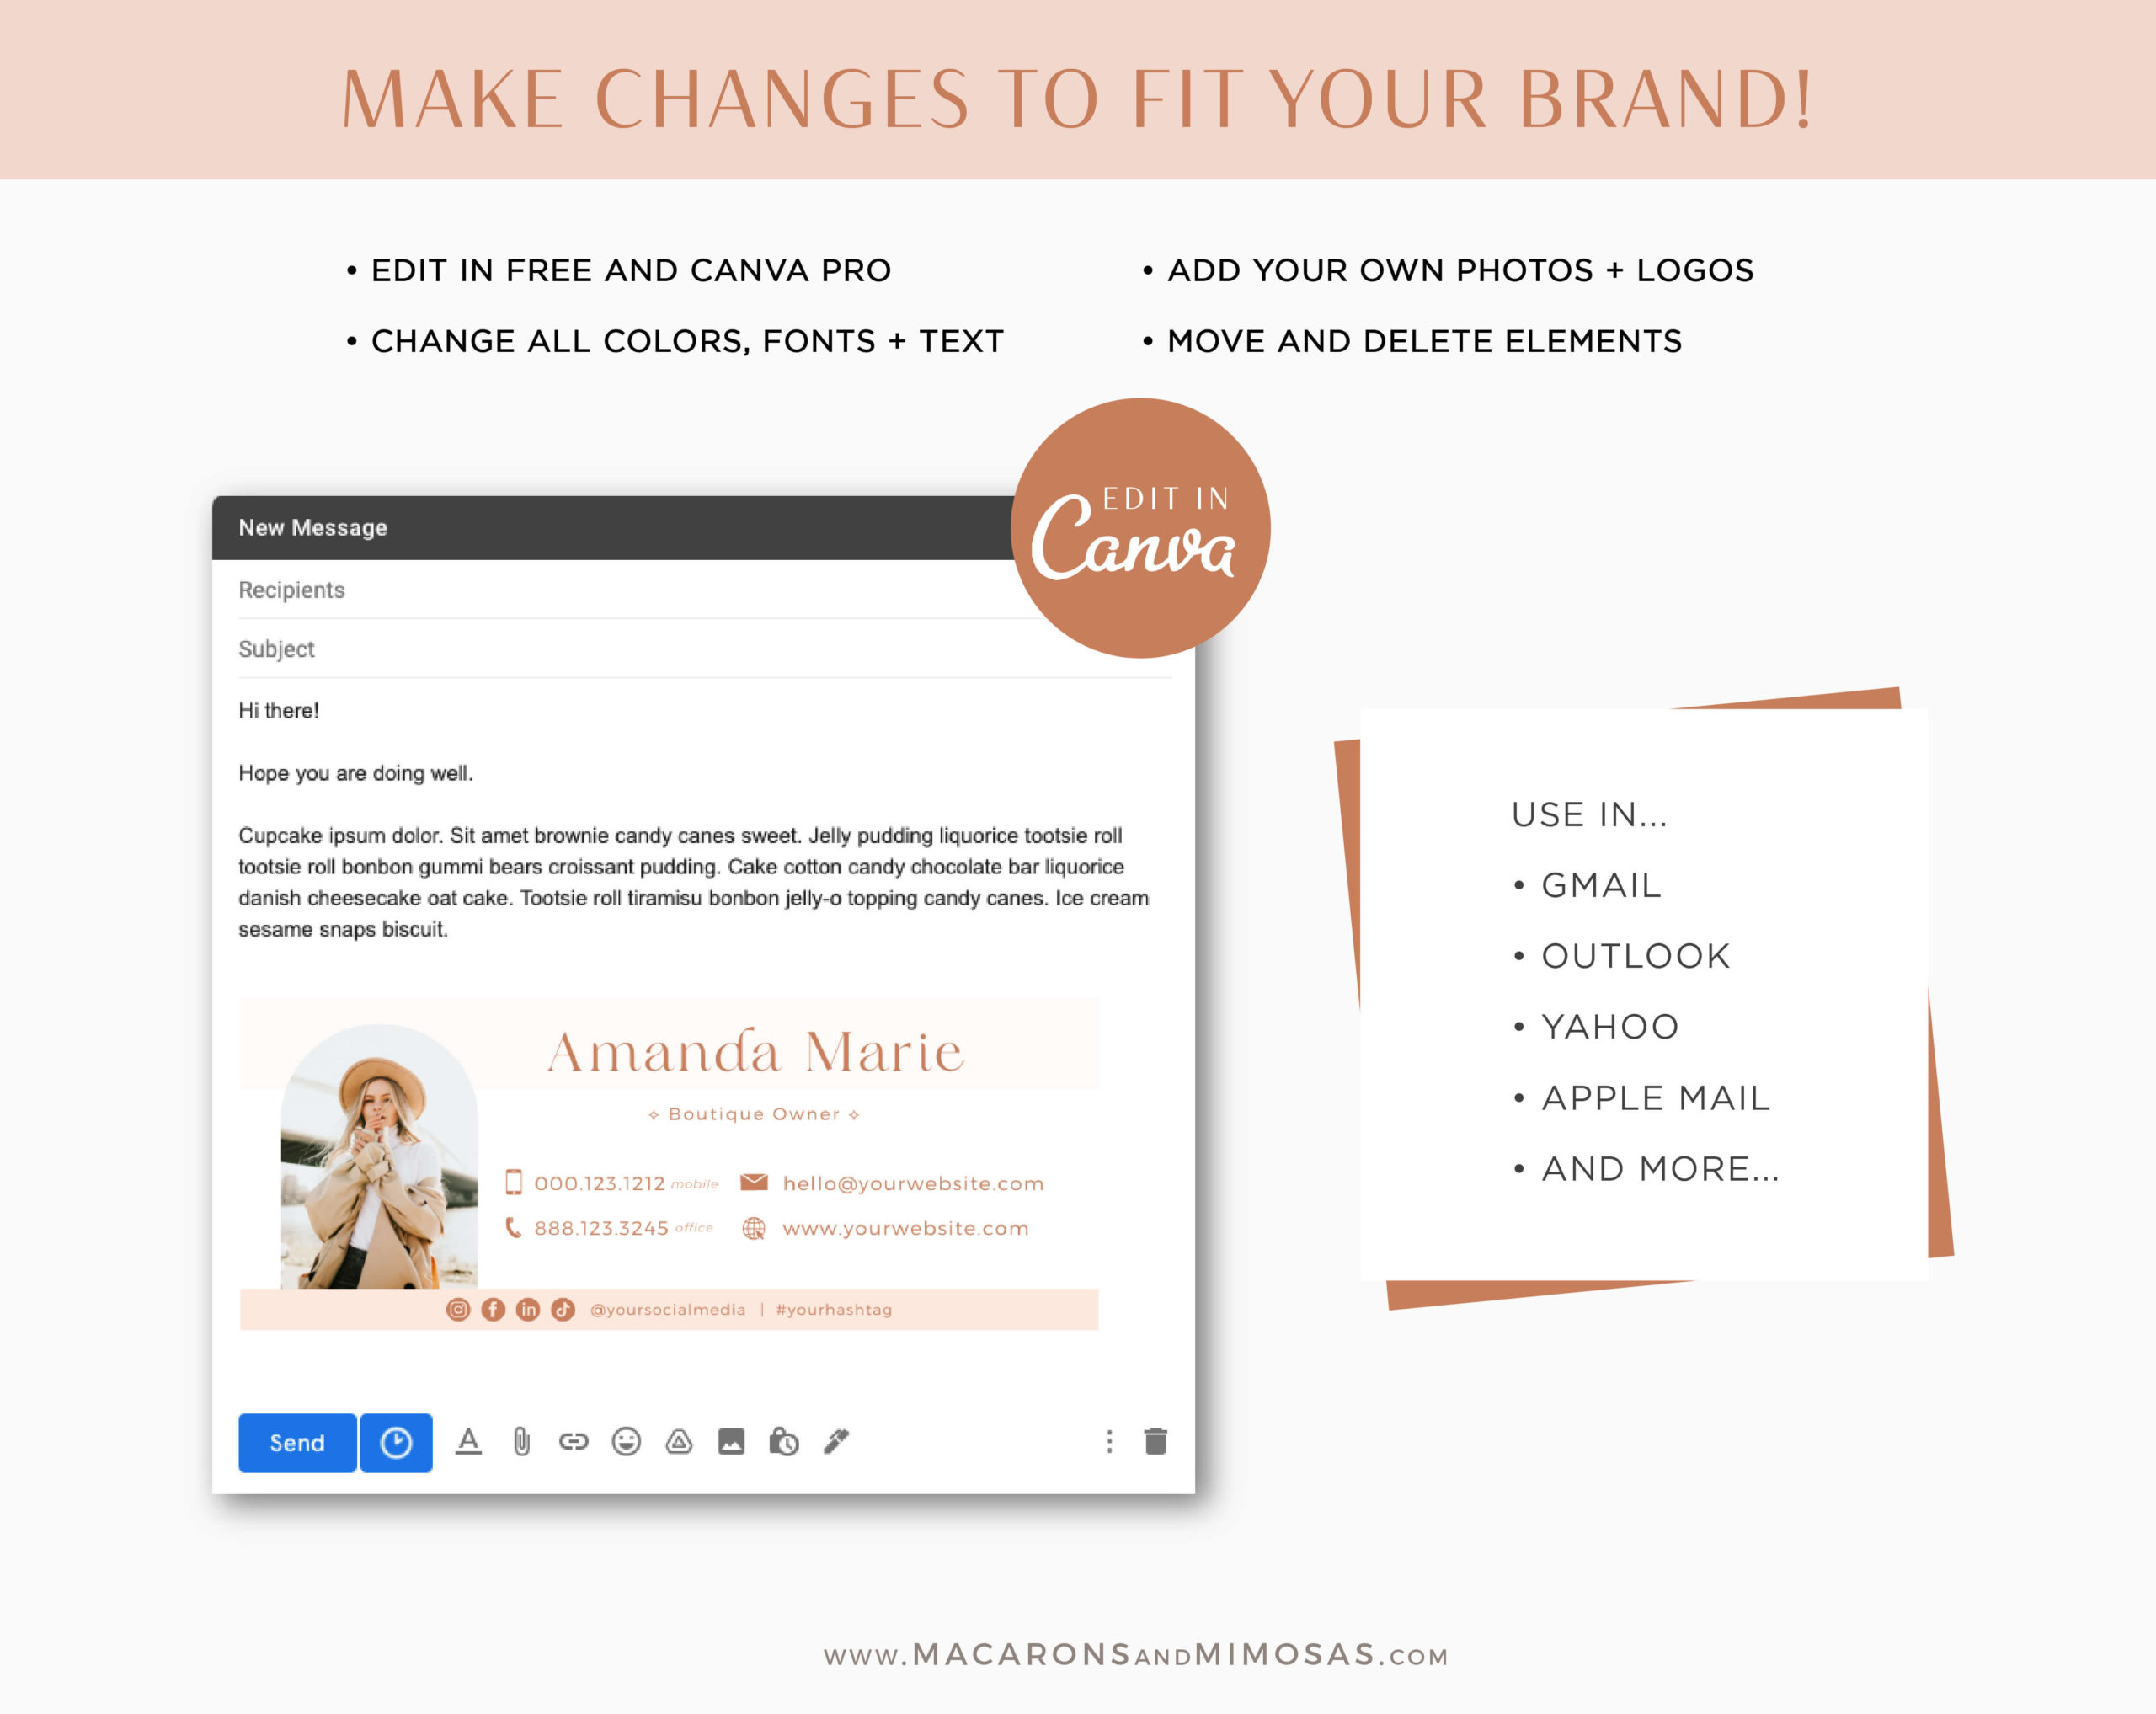 Neutral Boho Email Signature Template with Logo, Clickable Links Best Selling Gmail Email Signature Marketing Tool, Realtor Email Signature with Picture